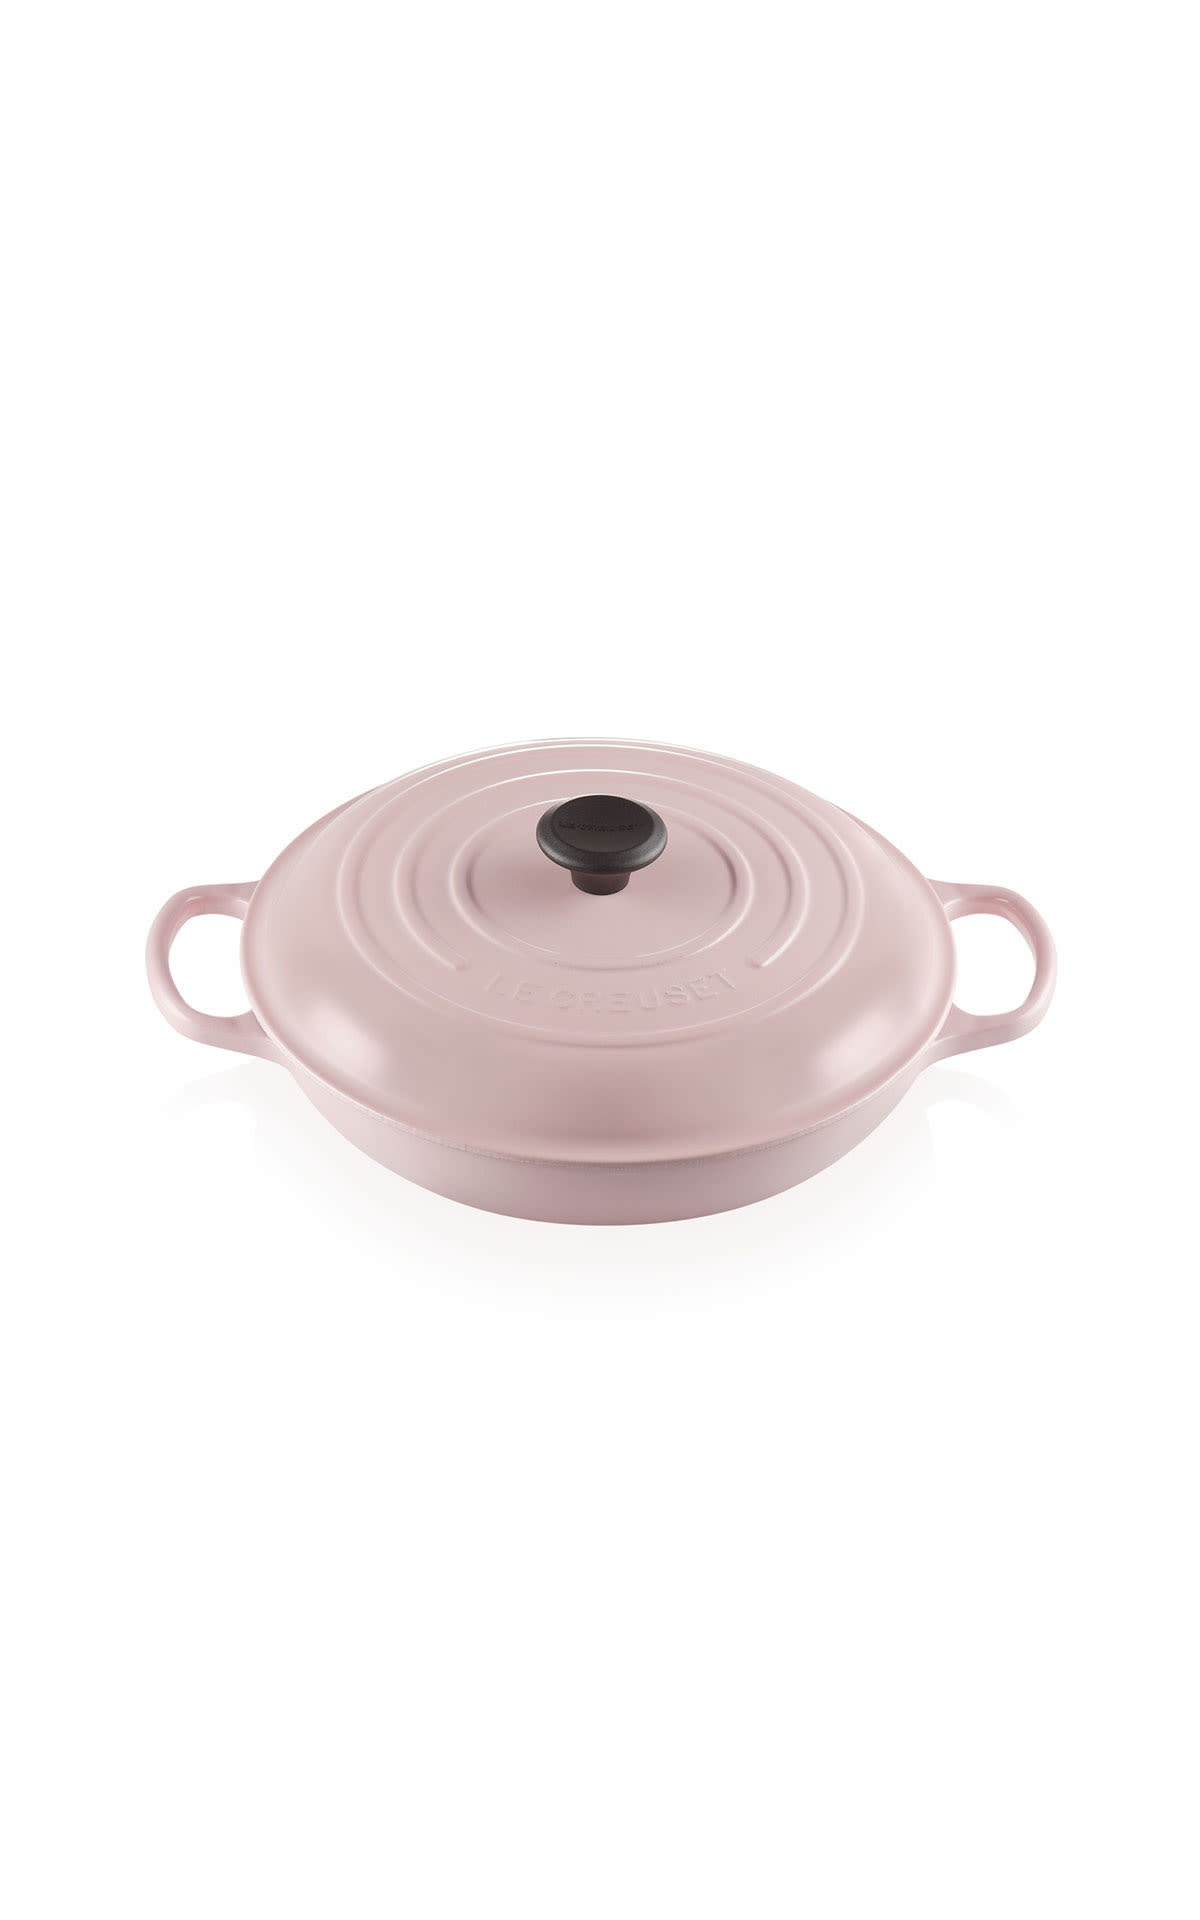 Le Creuset 26cm Shallow casserole cast iron chiffon pink from Bicester Village